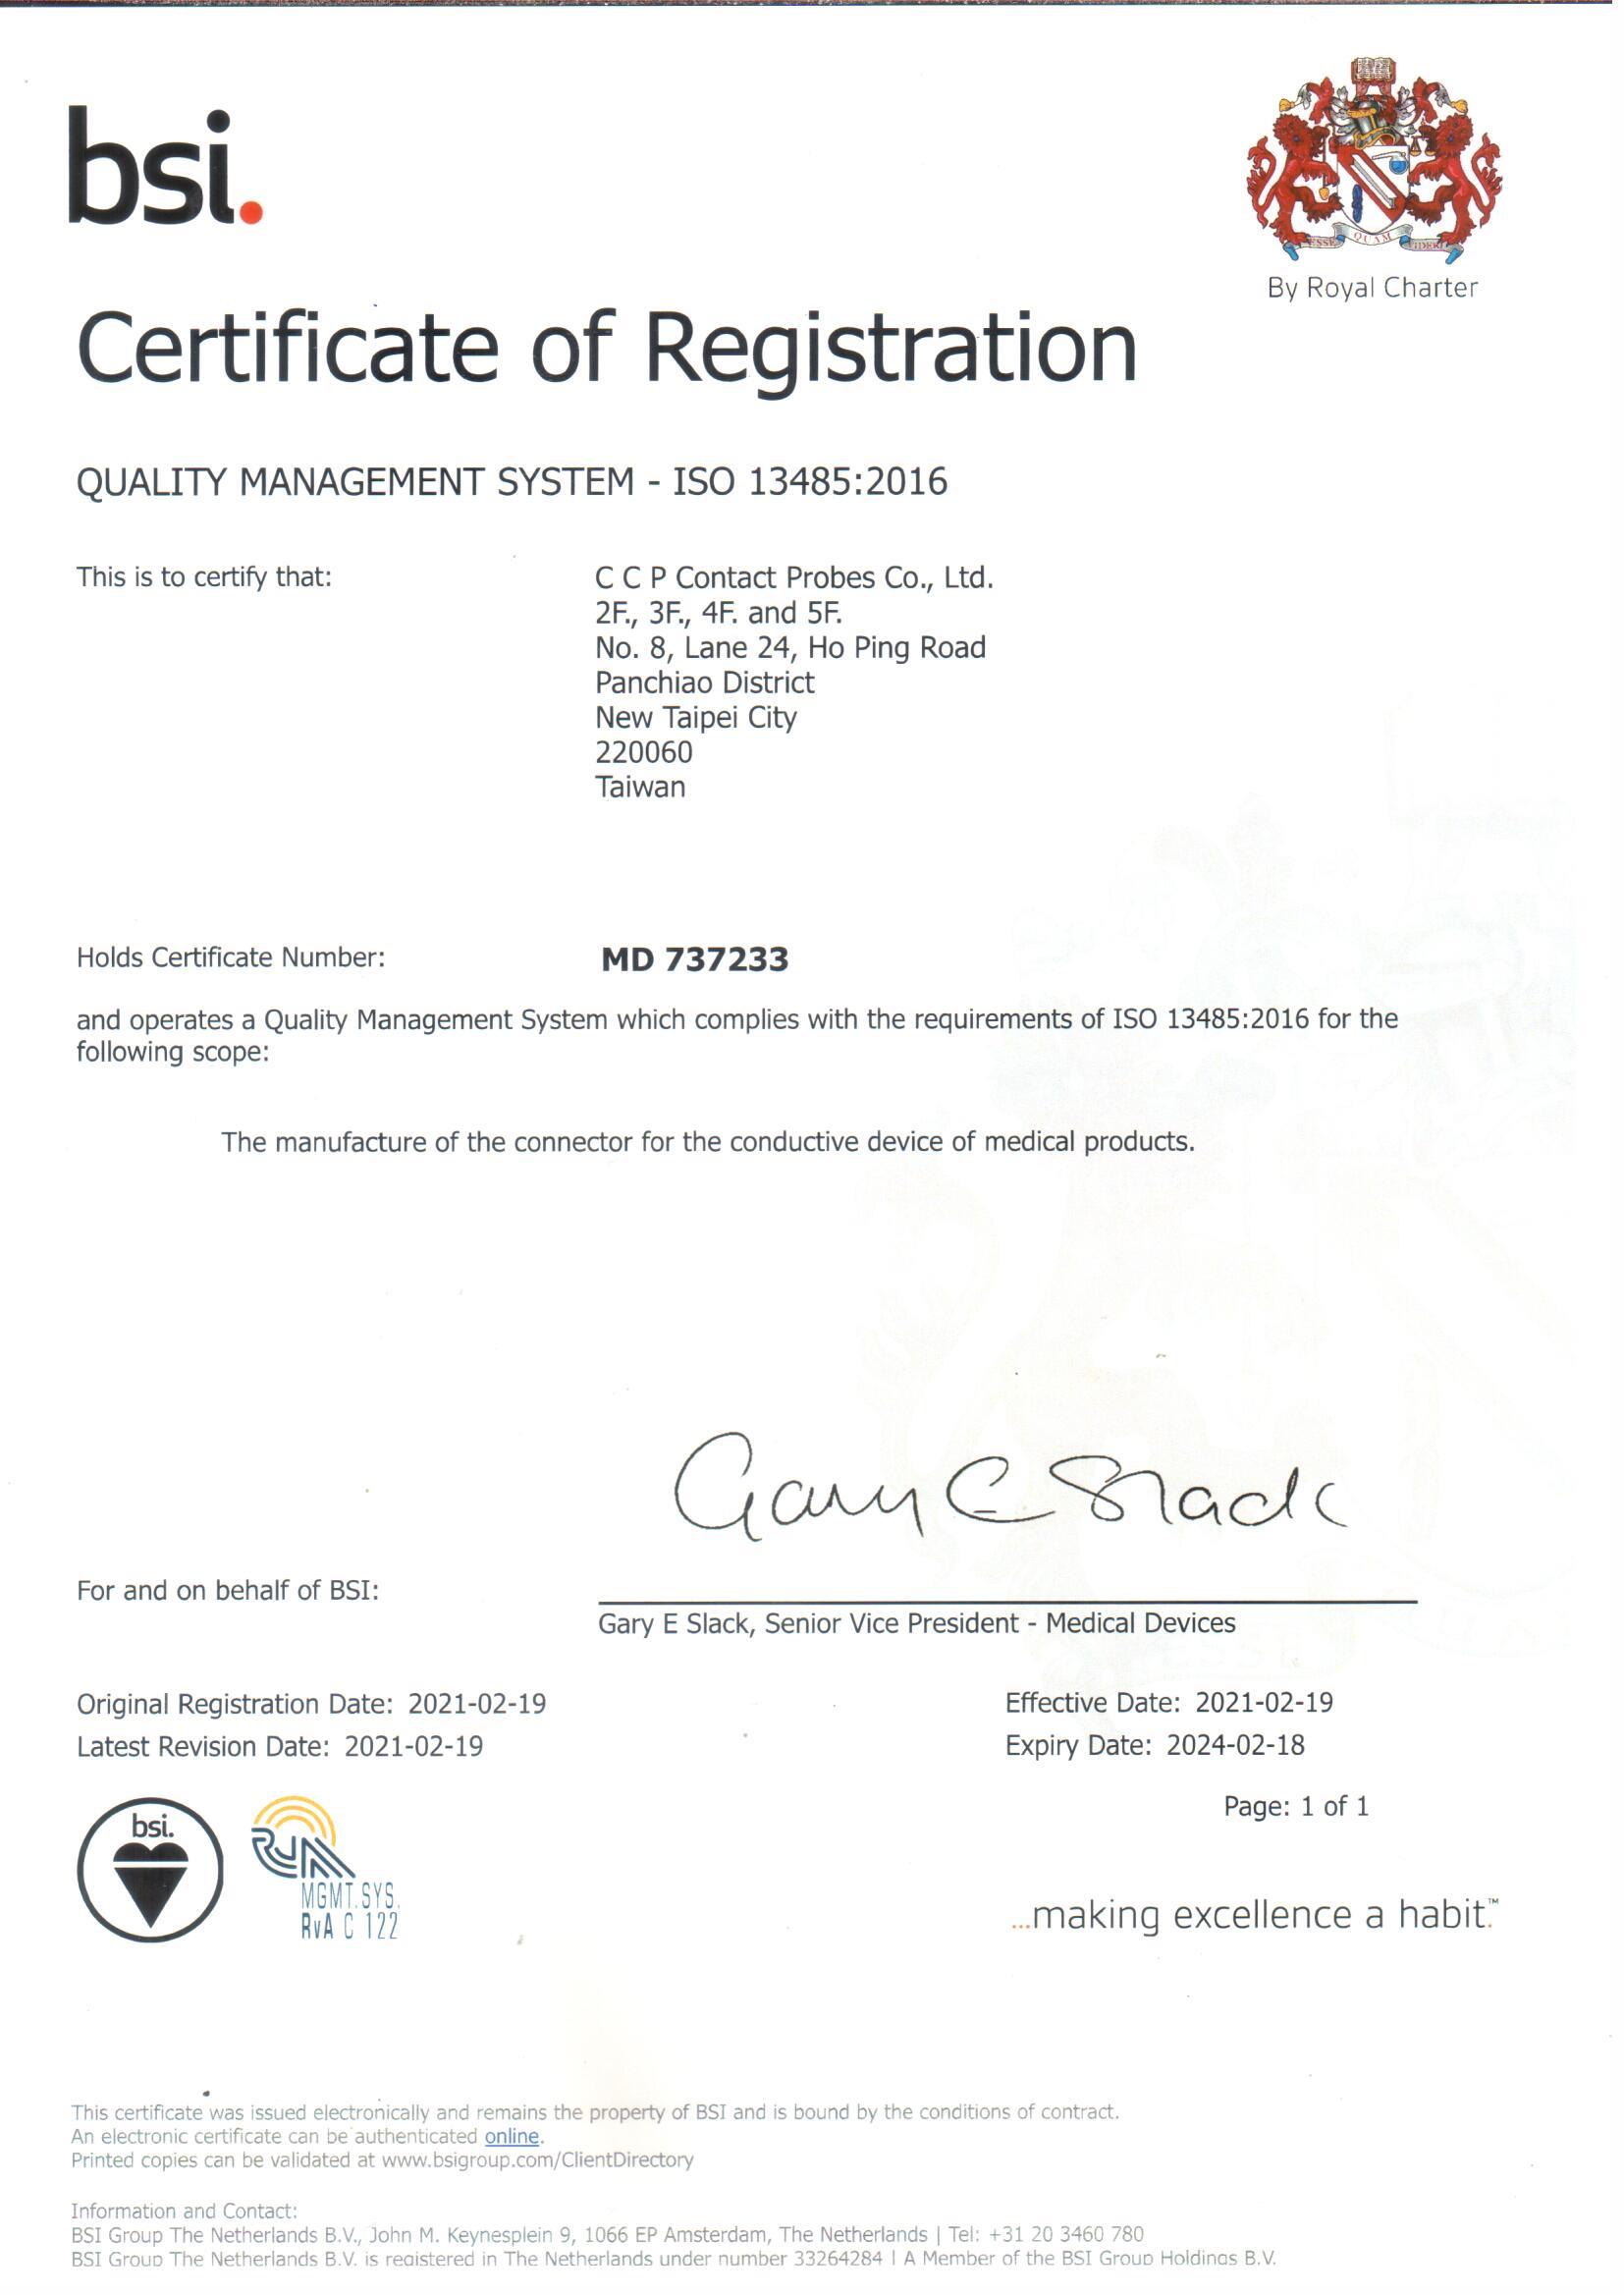 ISO 13485 Medical Devices Quality Management System Certification